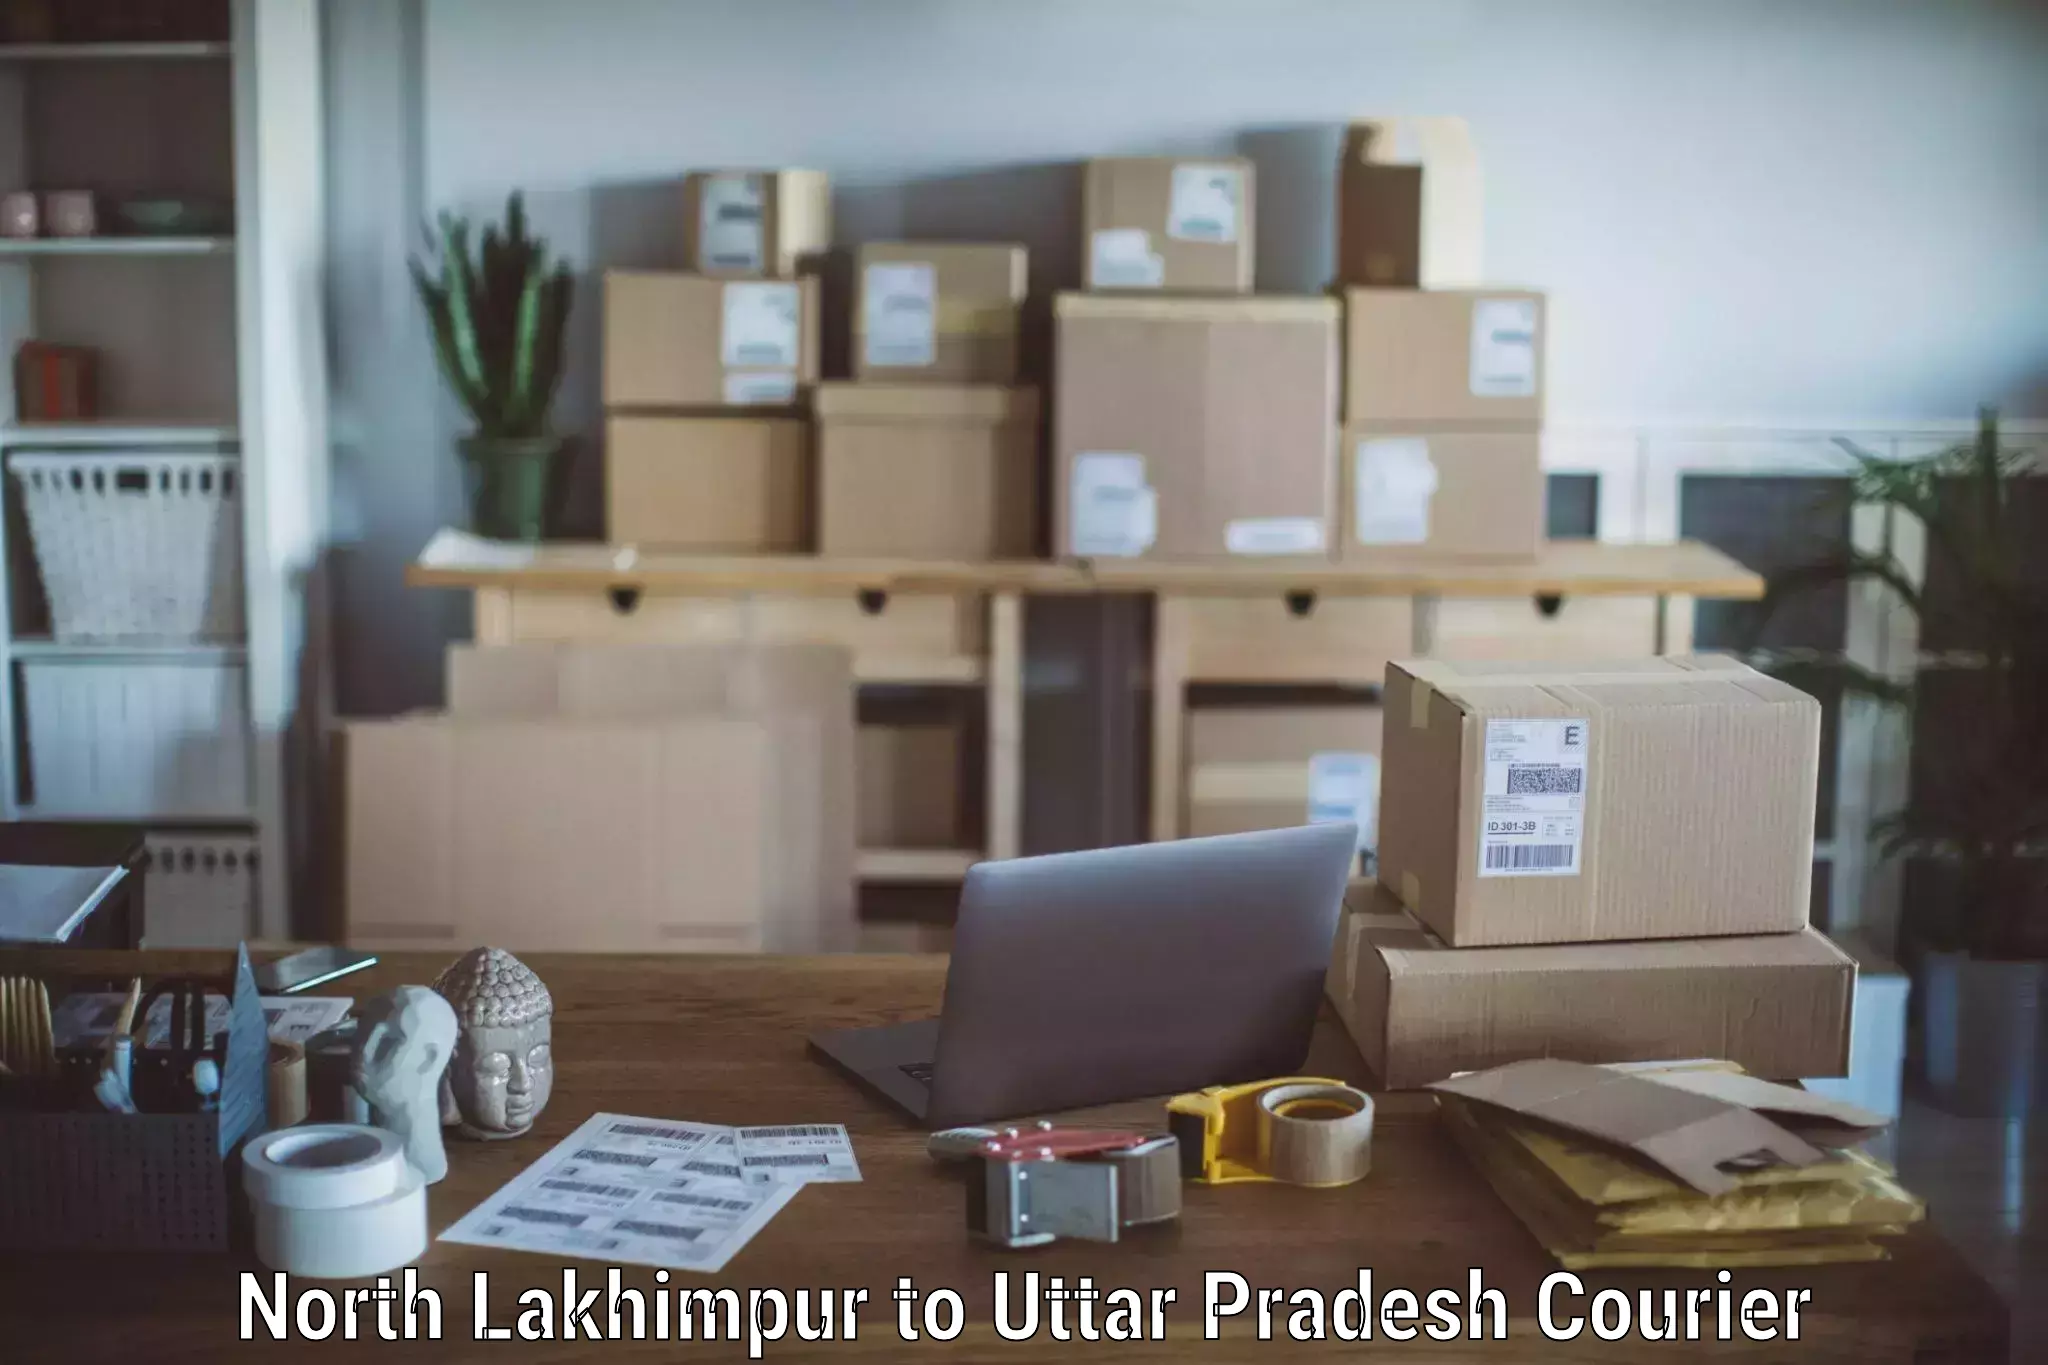 Cost-effective moving options North Lakhimpur to Ghaziabad